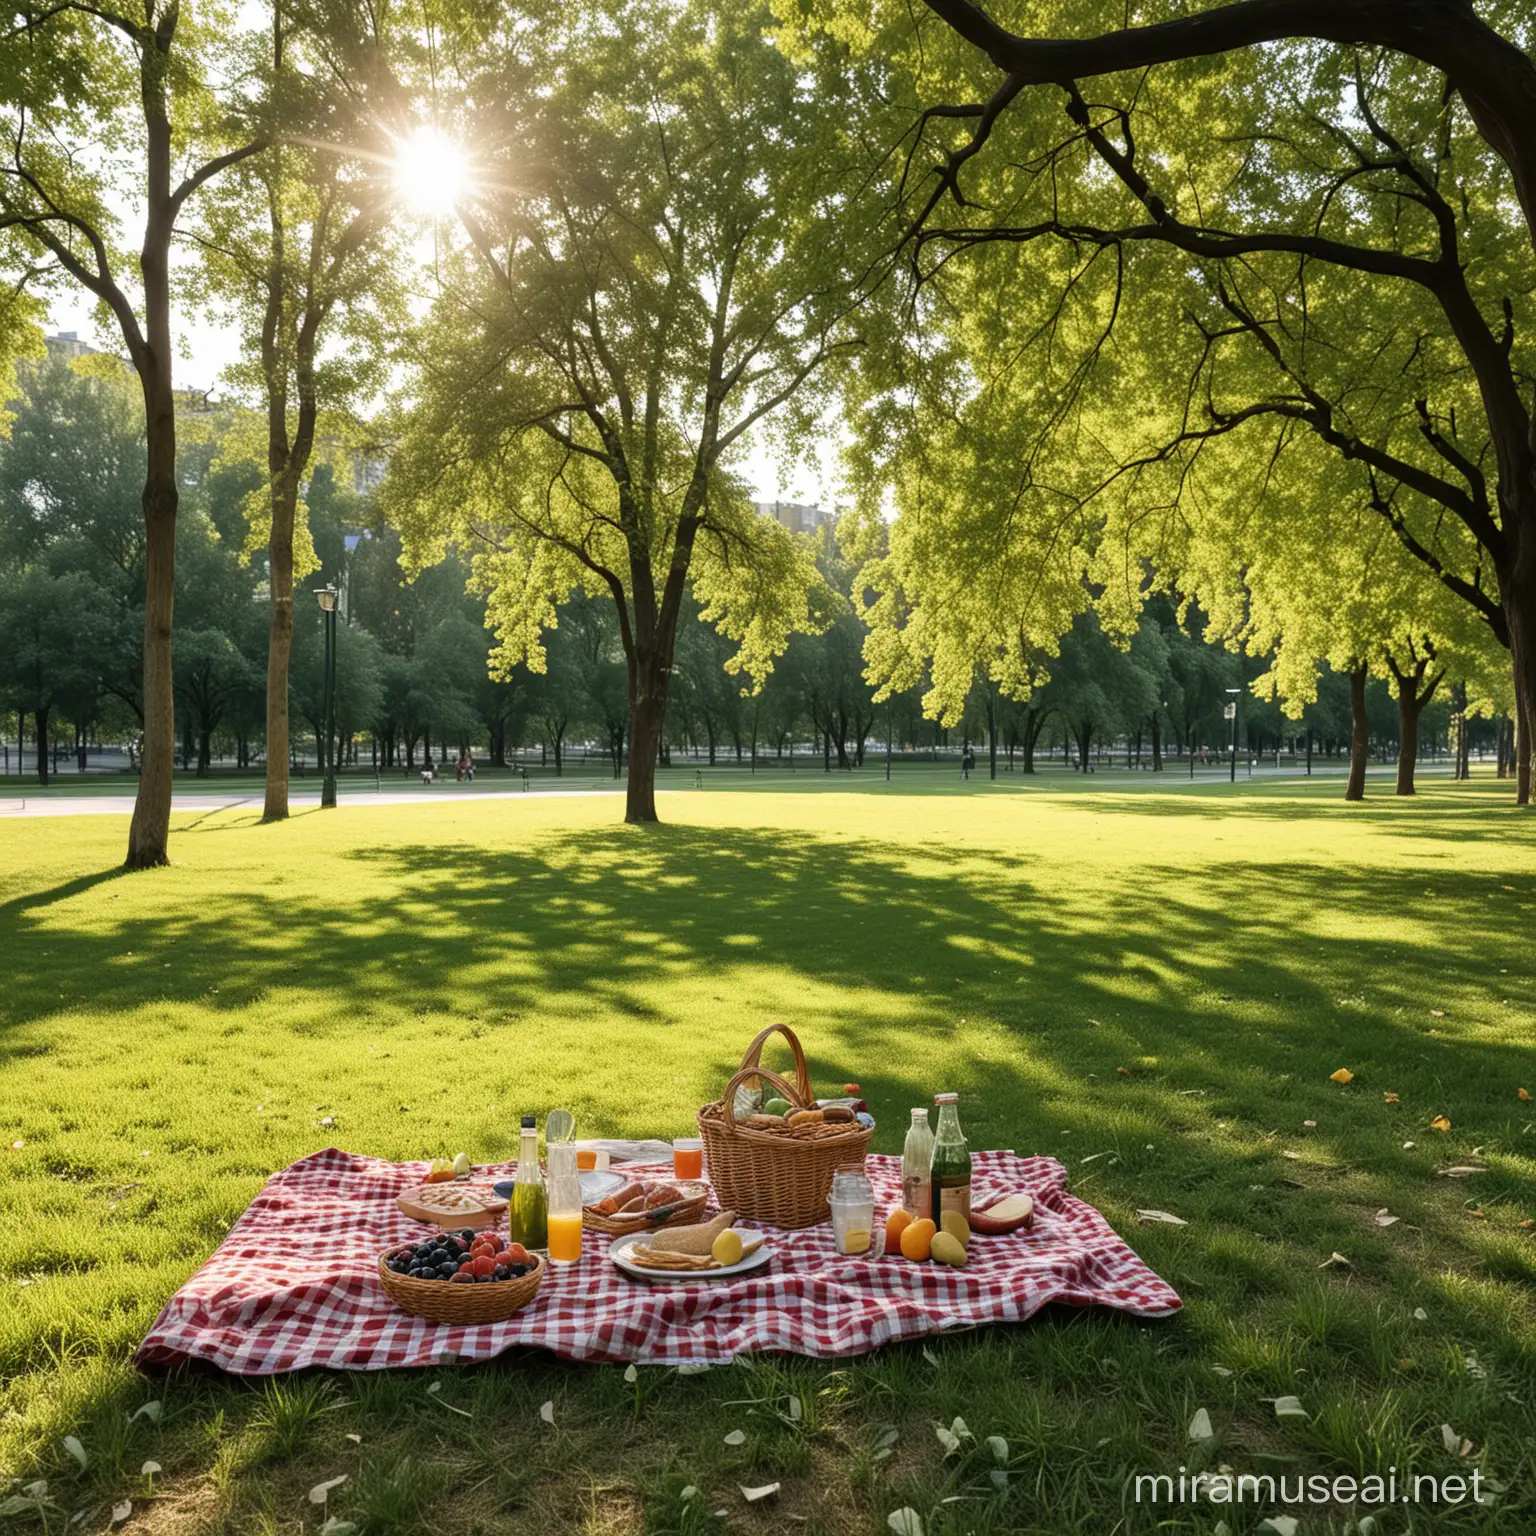 Urban Park Picnic Scene with Tranquil Atmosphere